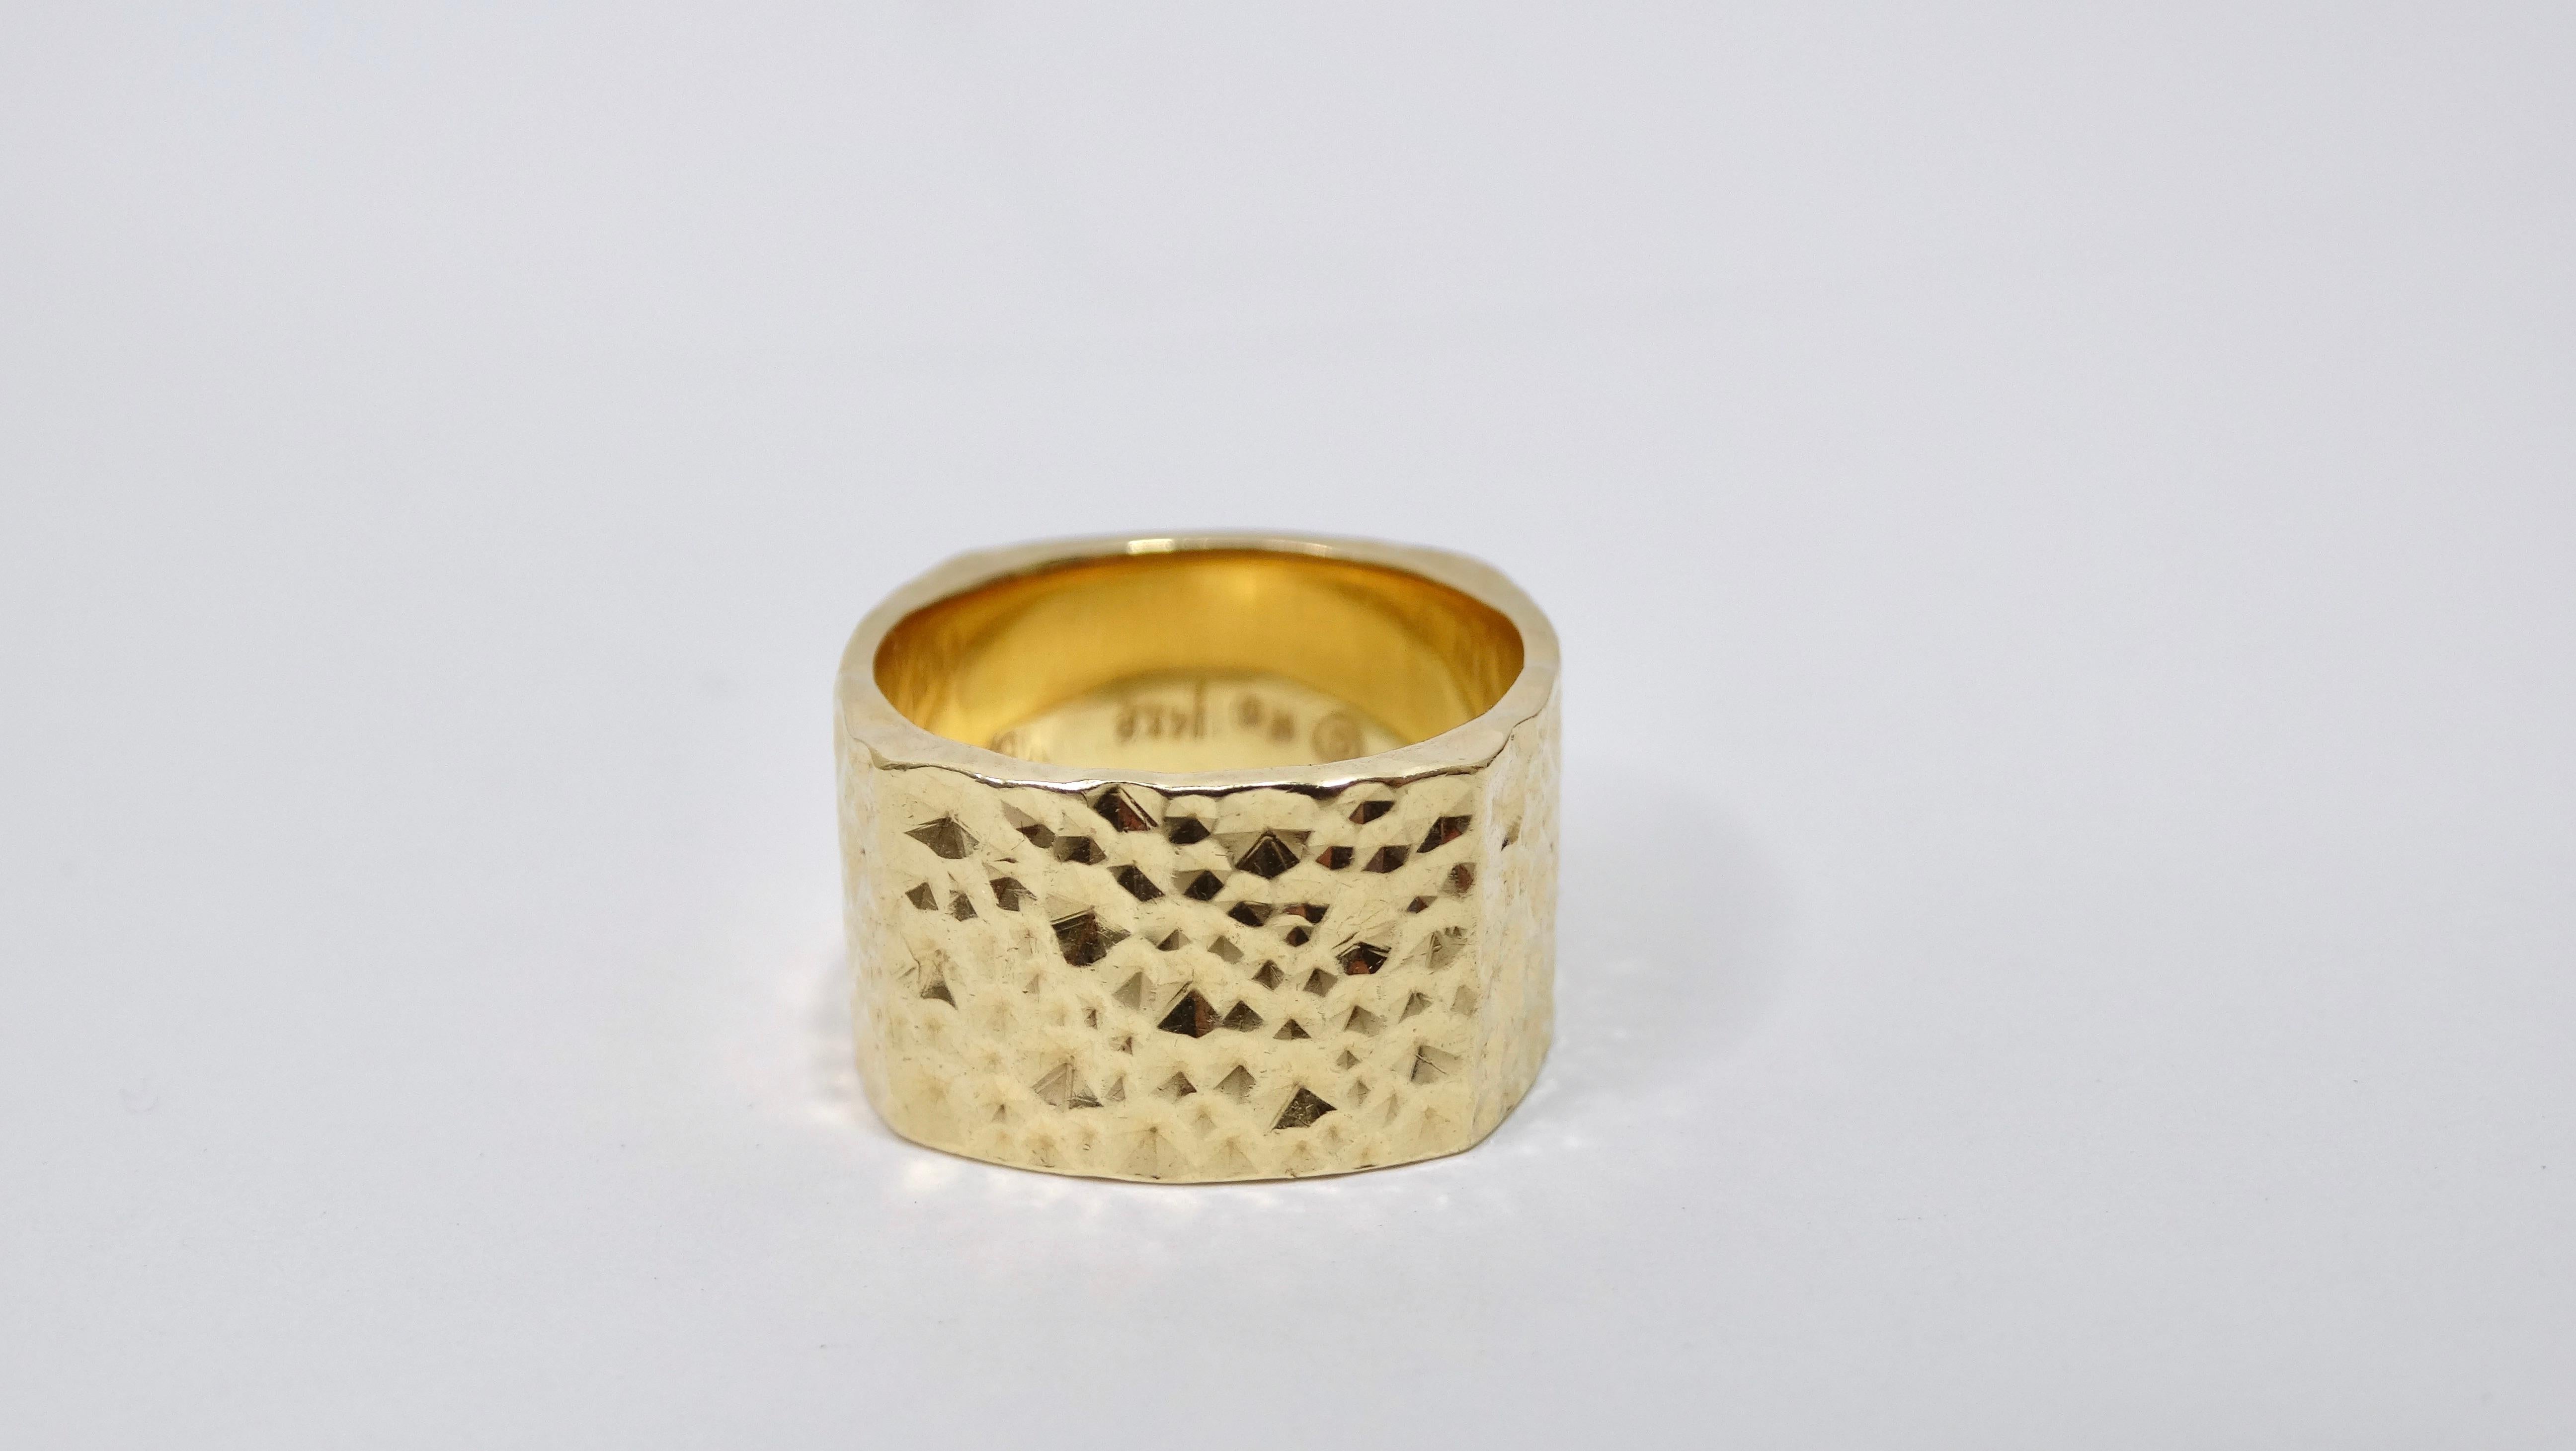 A simple yet stunning piece to add to your fine jewelry collection. You can throw this ring on everyday to pair with any of your other rings. It will be a staple! It has a beautifully textured and thick band, signed on the inside, and a slight